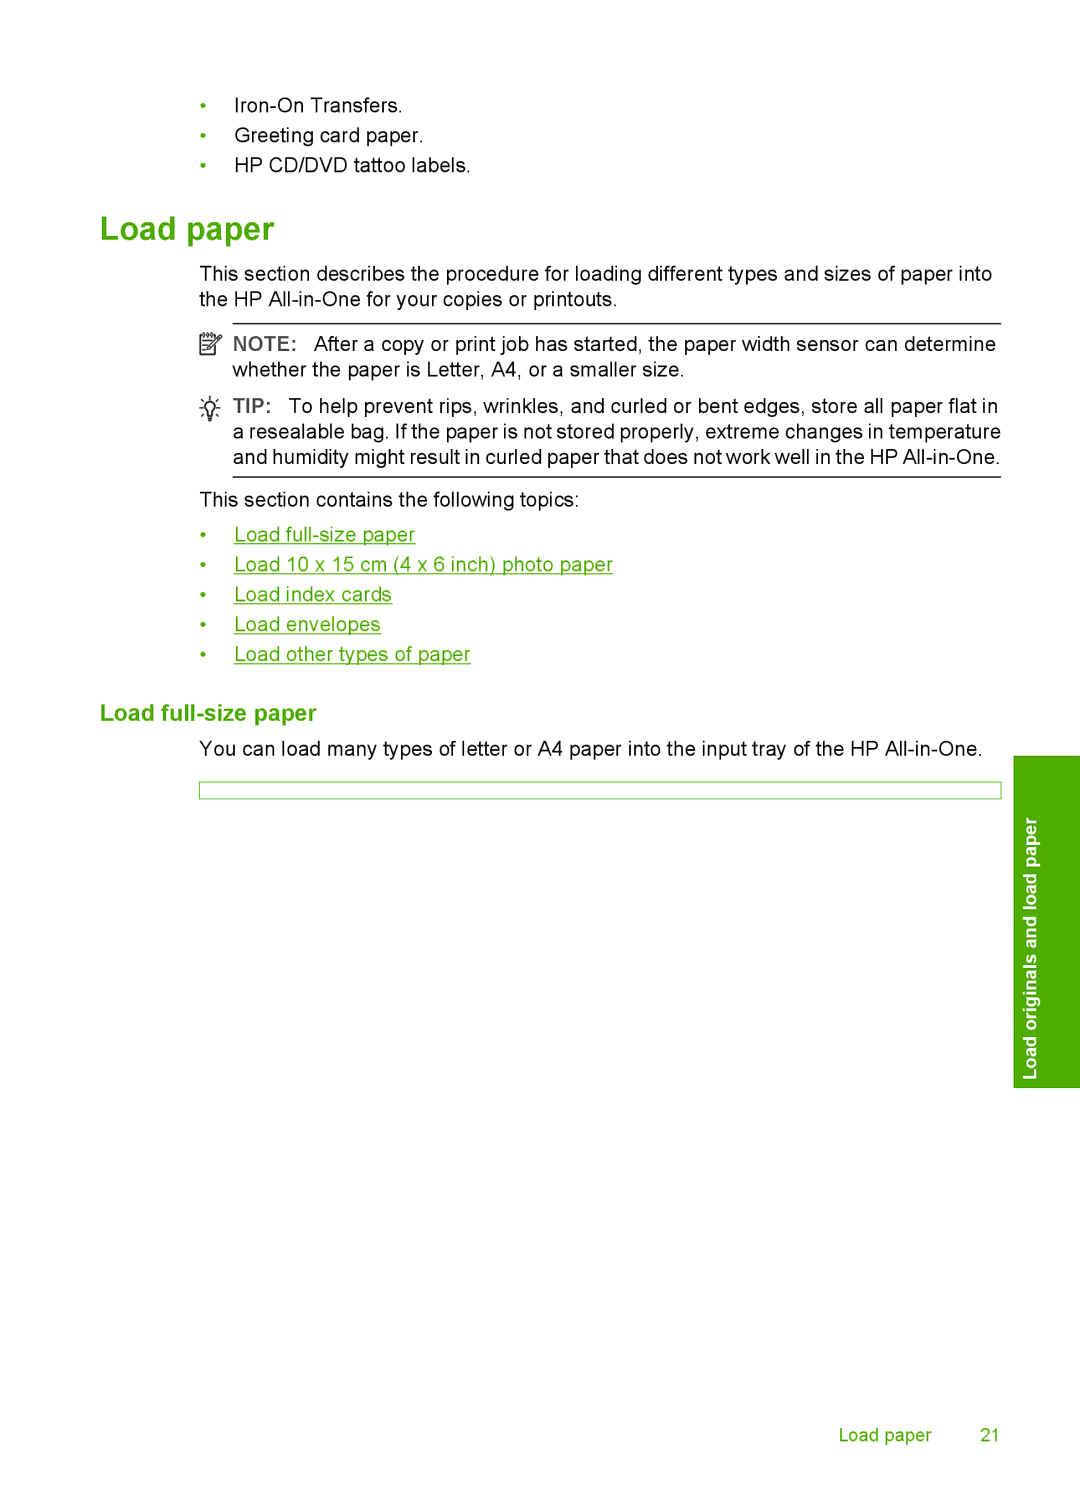 HP C4270, C4283, C4280, C4288, C4275, C4273, C4272, C4210, C4240 manual Load paper, Load full-size paper 